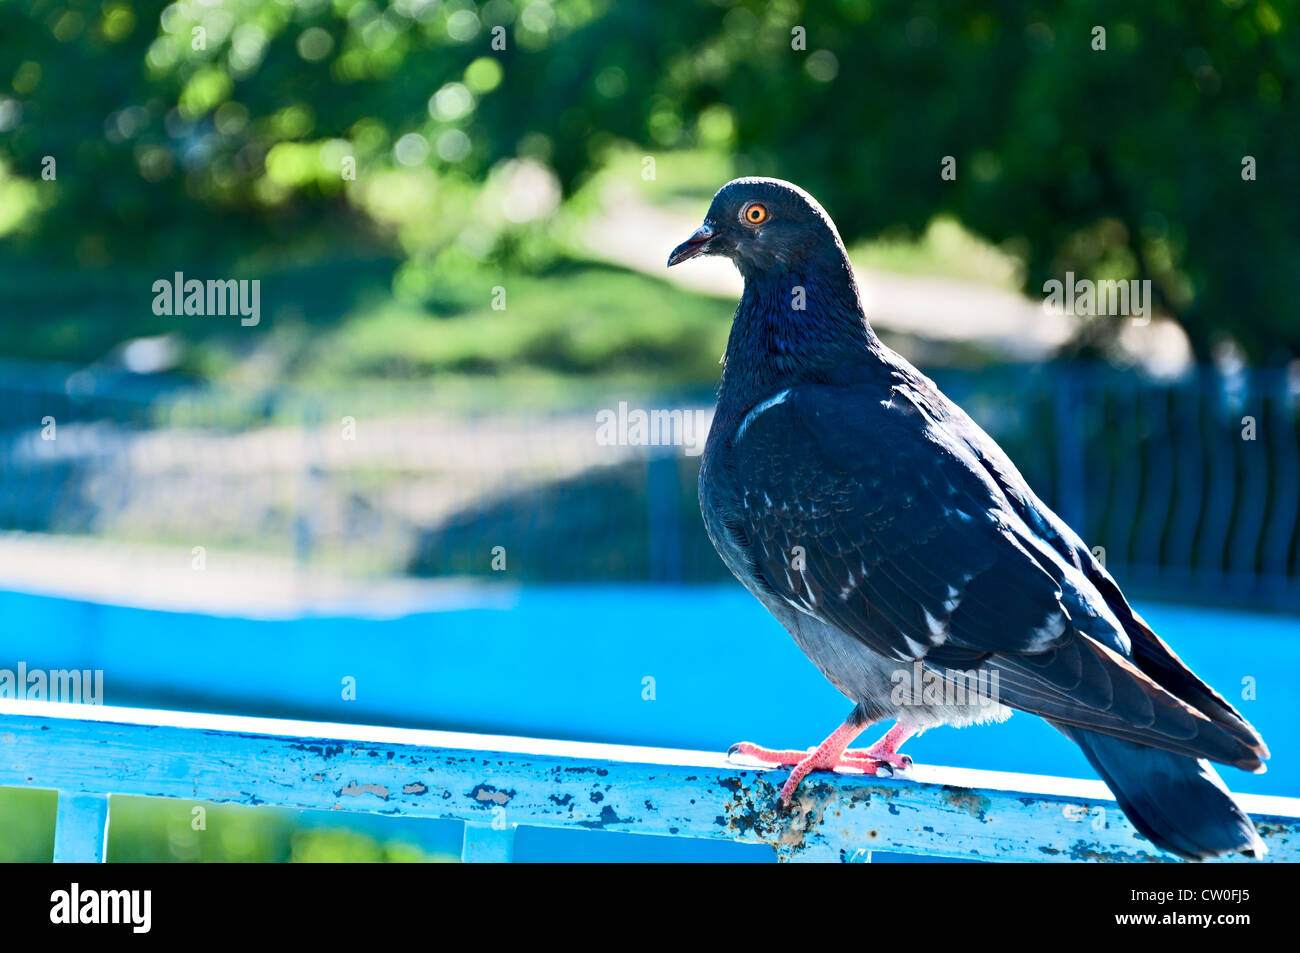 The blue rock pigeon sits on a handrail in city park Stock Photo